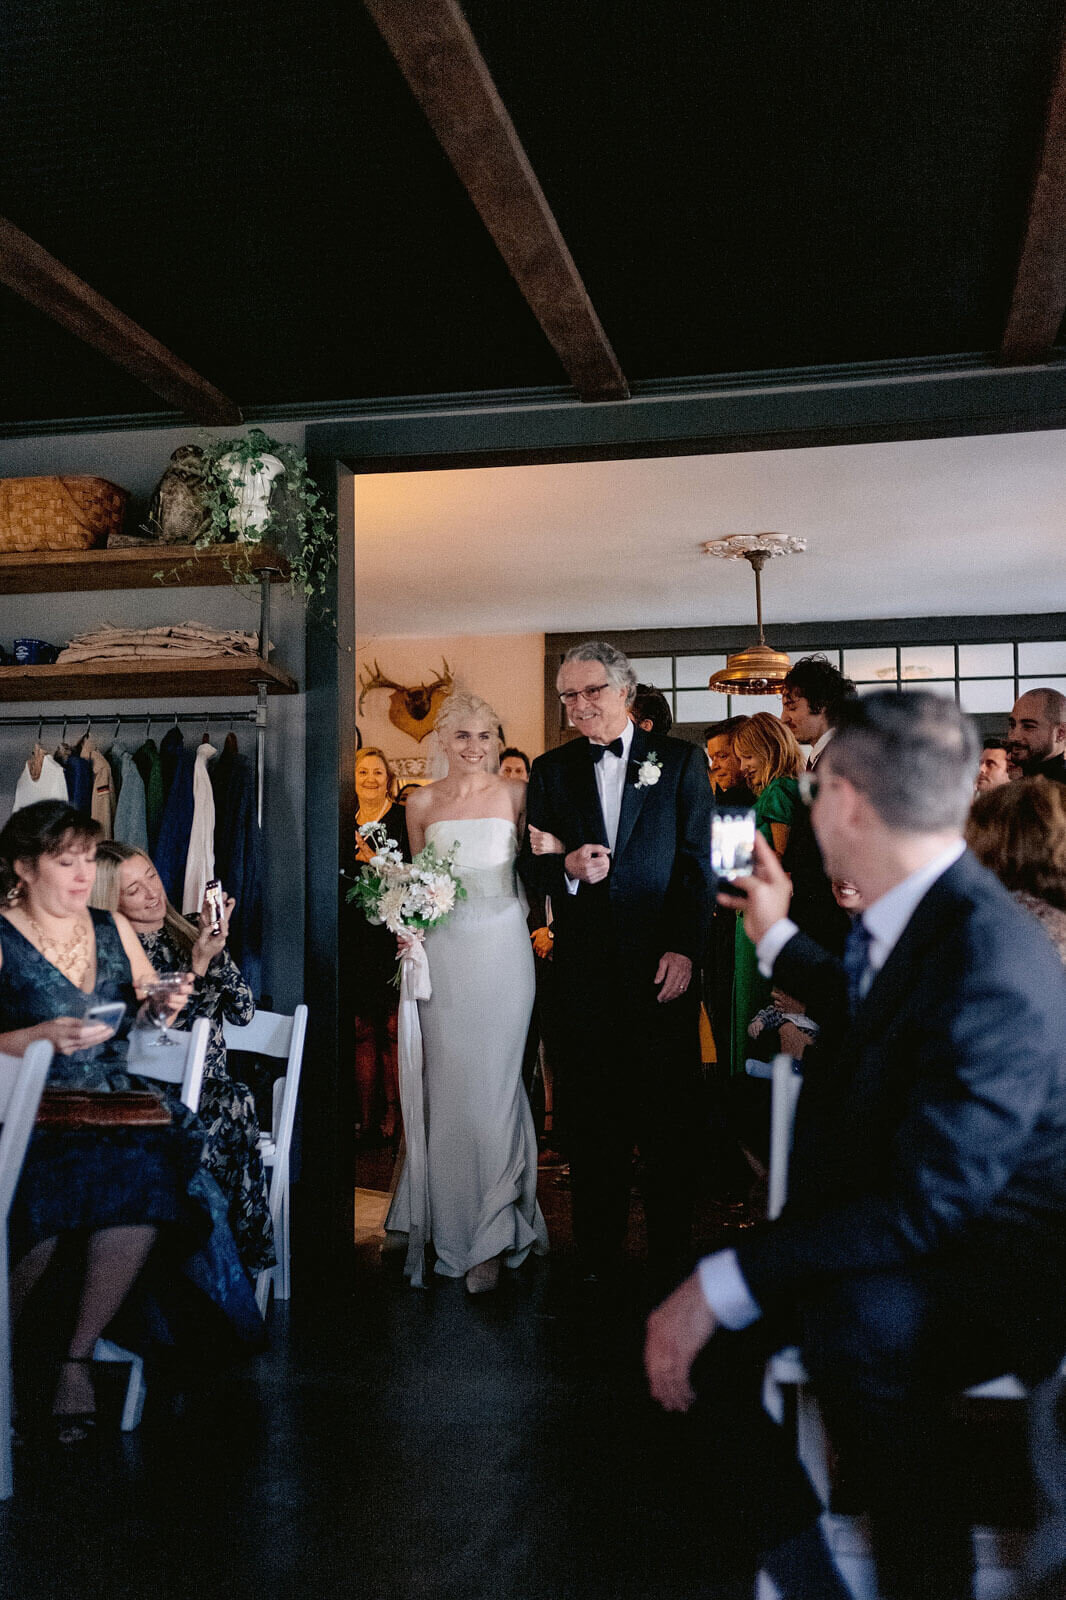 The bride and her father start to walk down the aisle in Foxfire Mountain House, New York. Wedding Image by Jenny Fu Studio